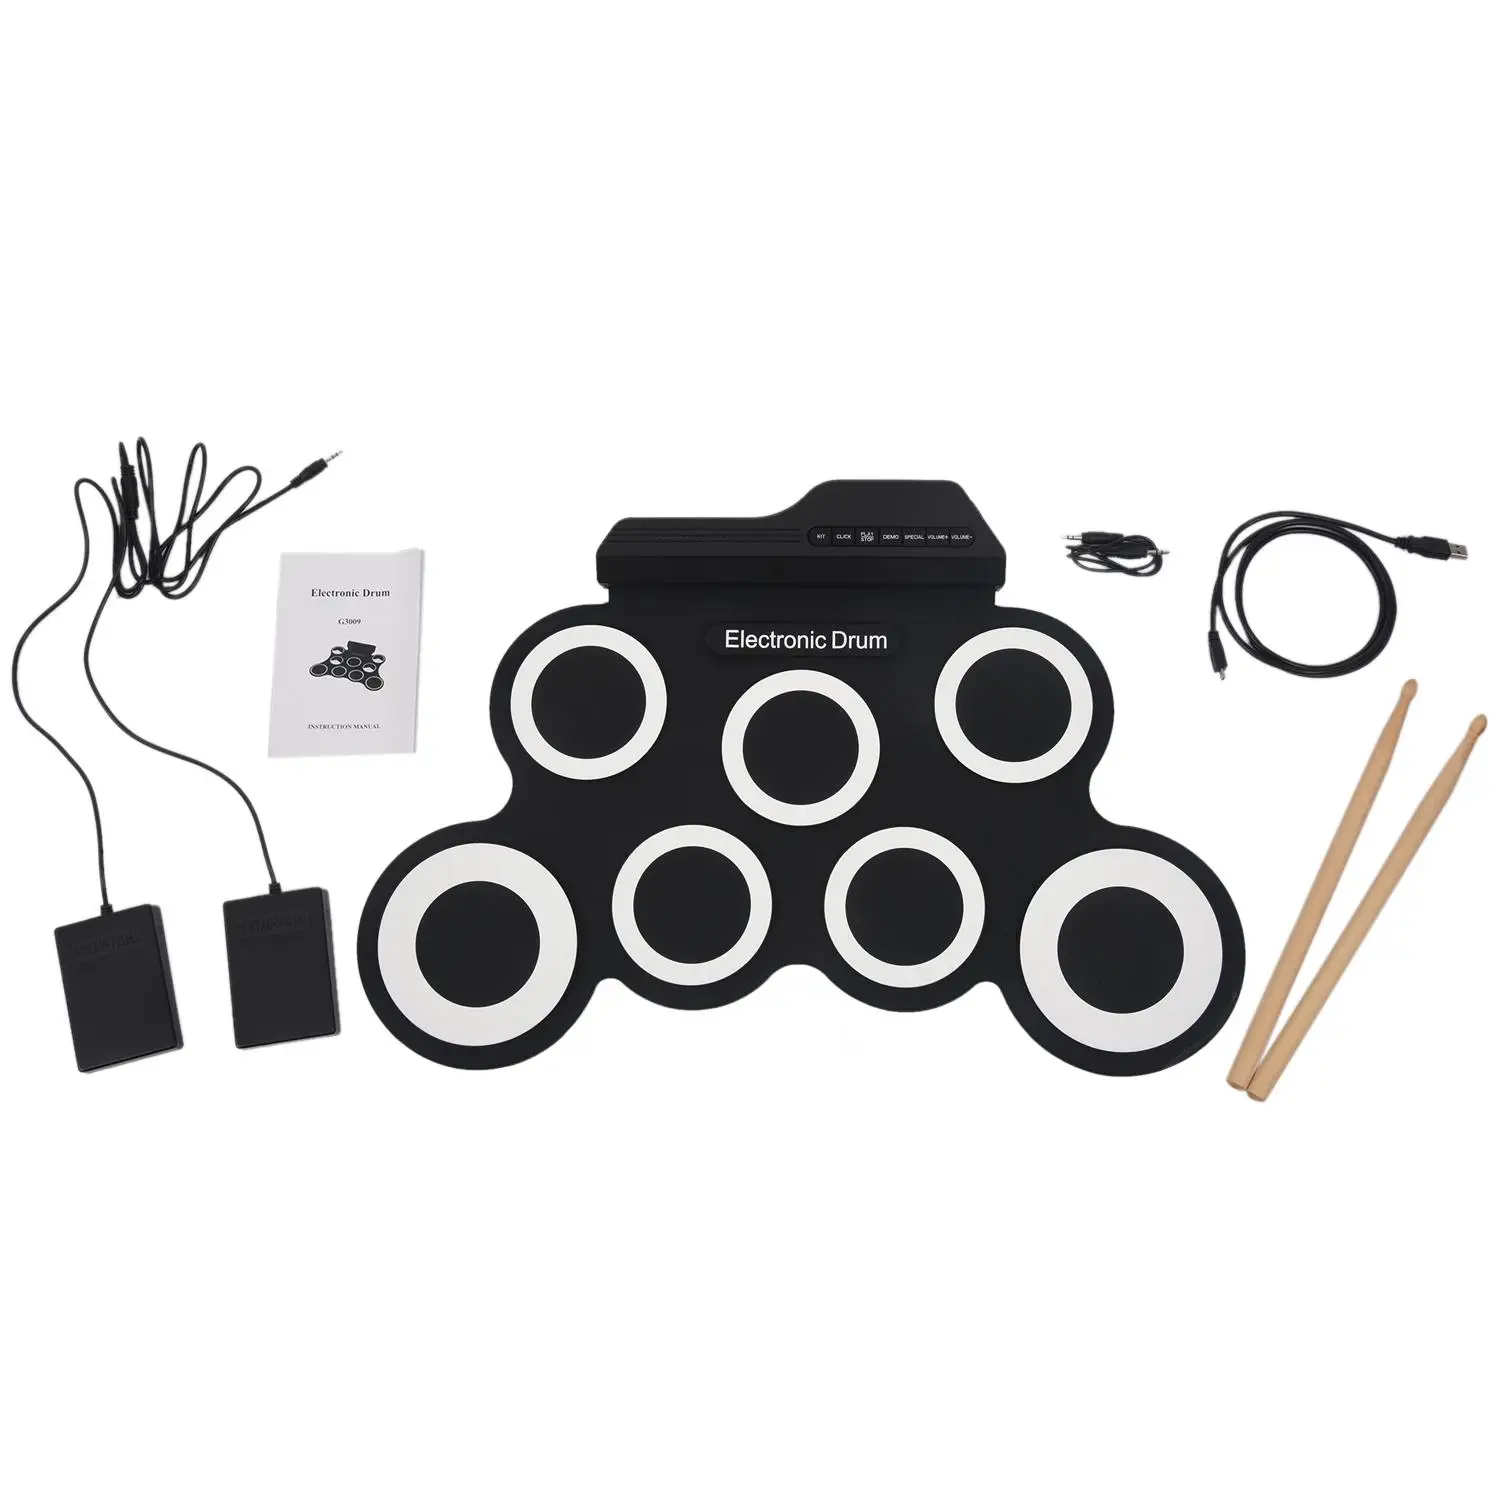 Electronic Drum Set /7 Electronic Drum /7 Tone /8 Demo Song/ 7 Drum Pads Metronome Function /External Instrument Input Availab